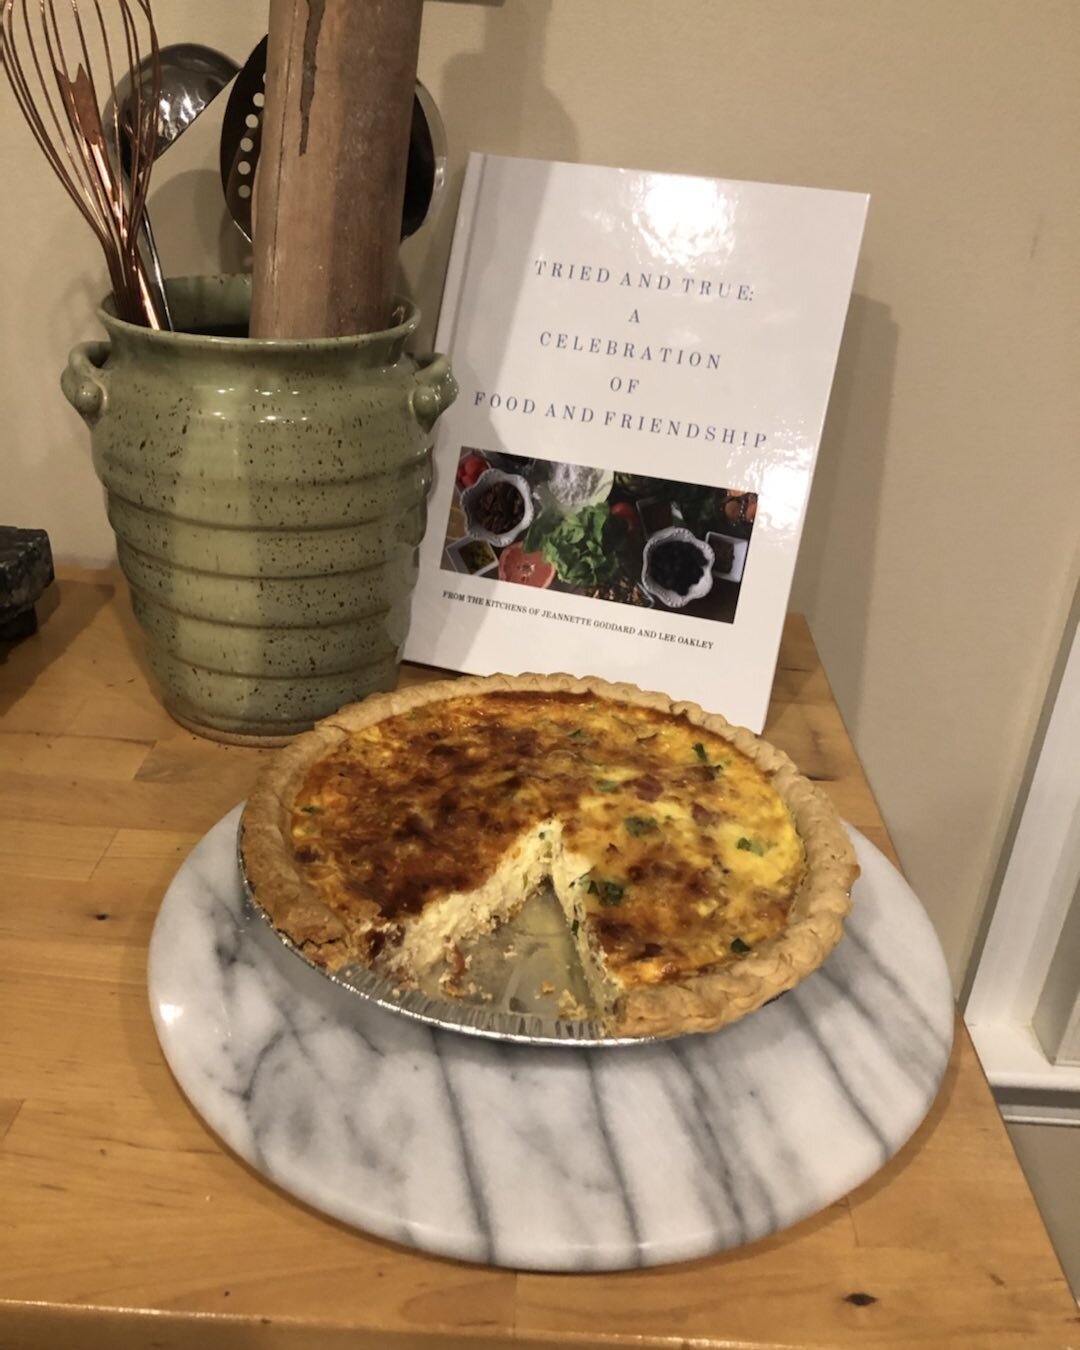 Look at this yummy Quiche Lorraine shared by a new owner of our cookbook, Tried and True: A Celebration of Food and Friendship where you can find 111 additional delicious recipes.  #cookbooks #southerncookbooks #shoplocal #nashville #oakleyssouthernd